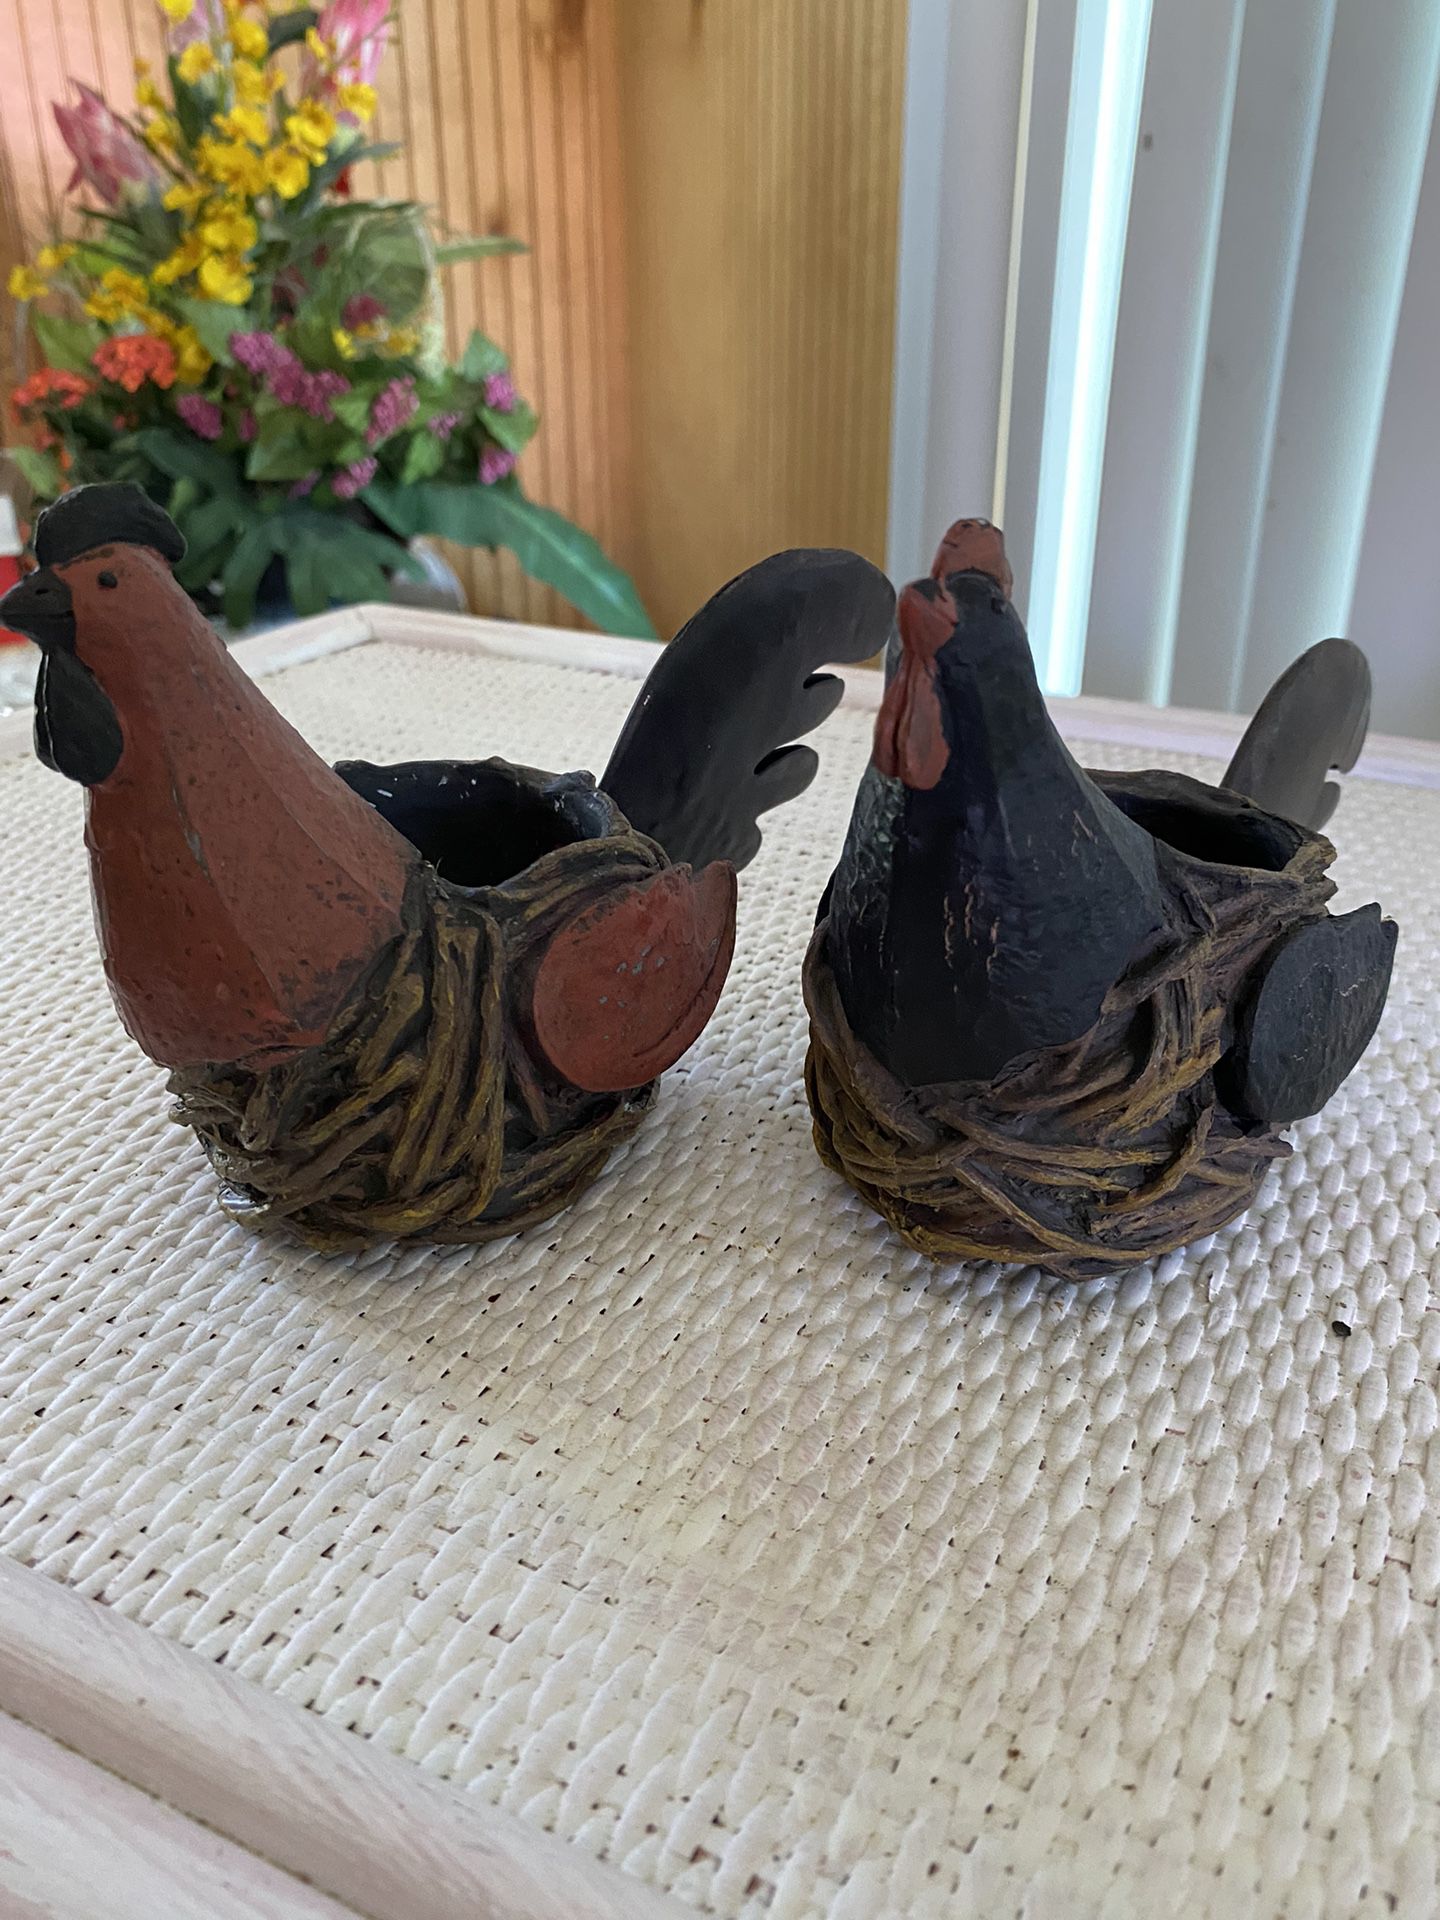 Small Rooster Candle Holders